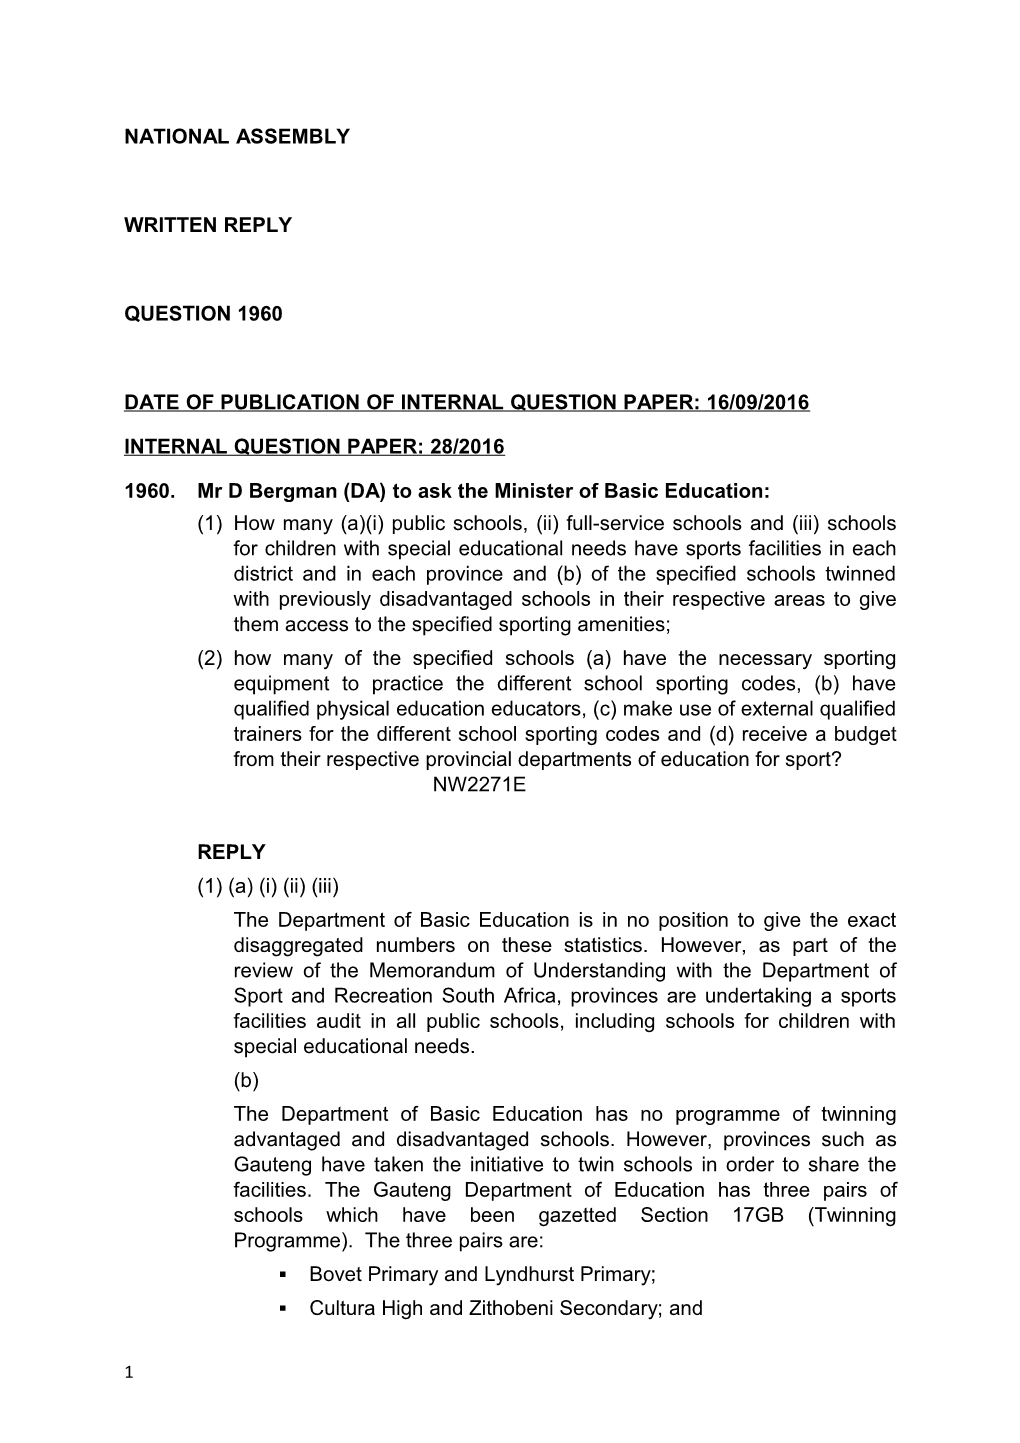 Date of Publication of Internal Question Paper: 16/09/2016